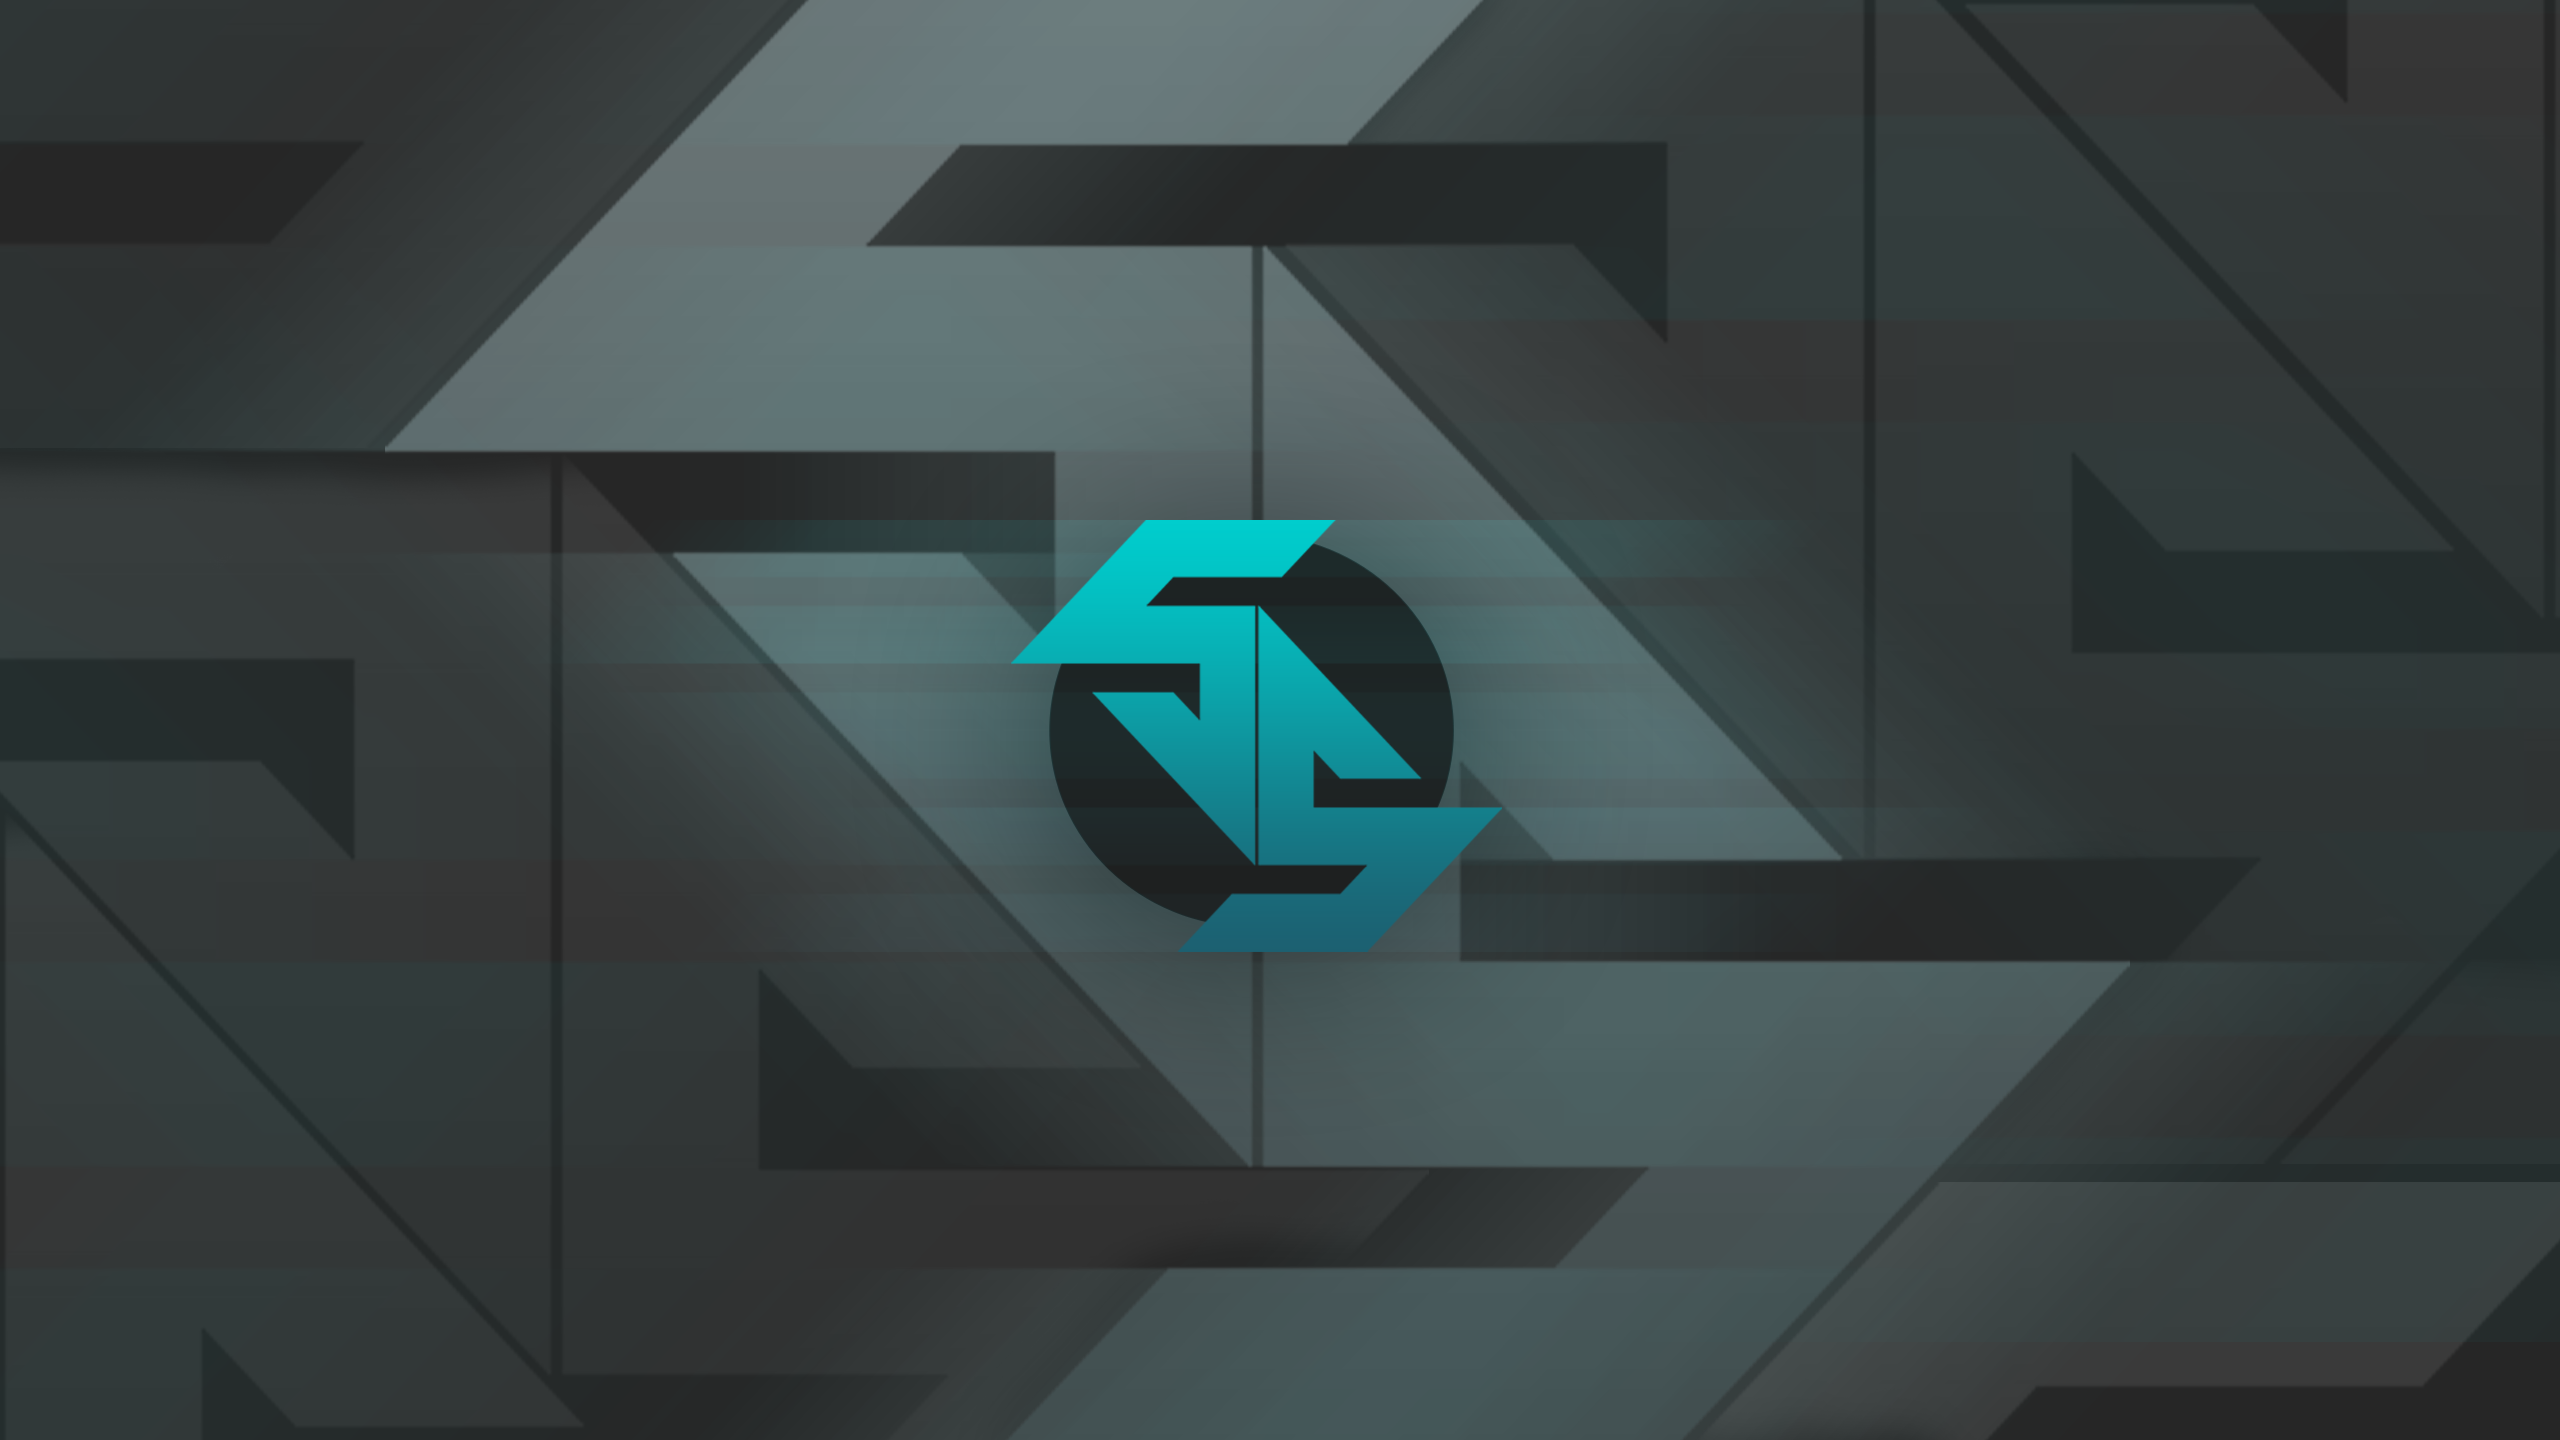 General 2560x1440 Counter-Strike: Global Offensive cyan gray background PC gaming digital art simple background logo spes salutis video games